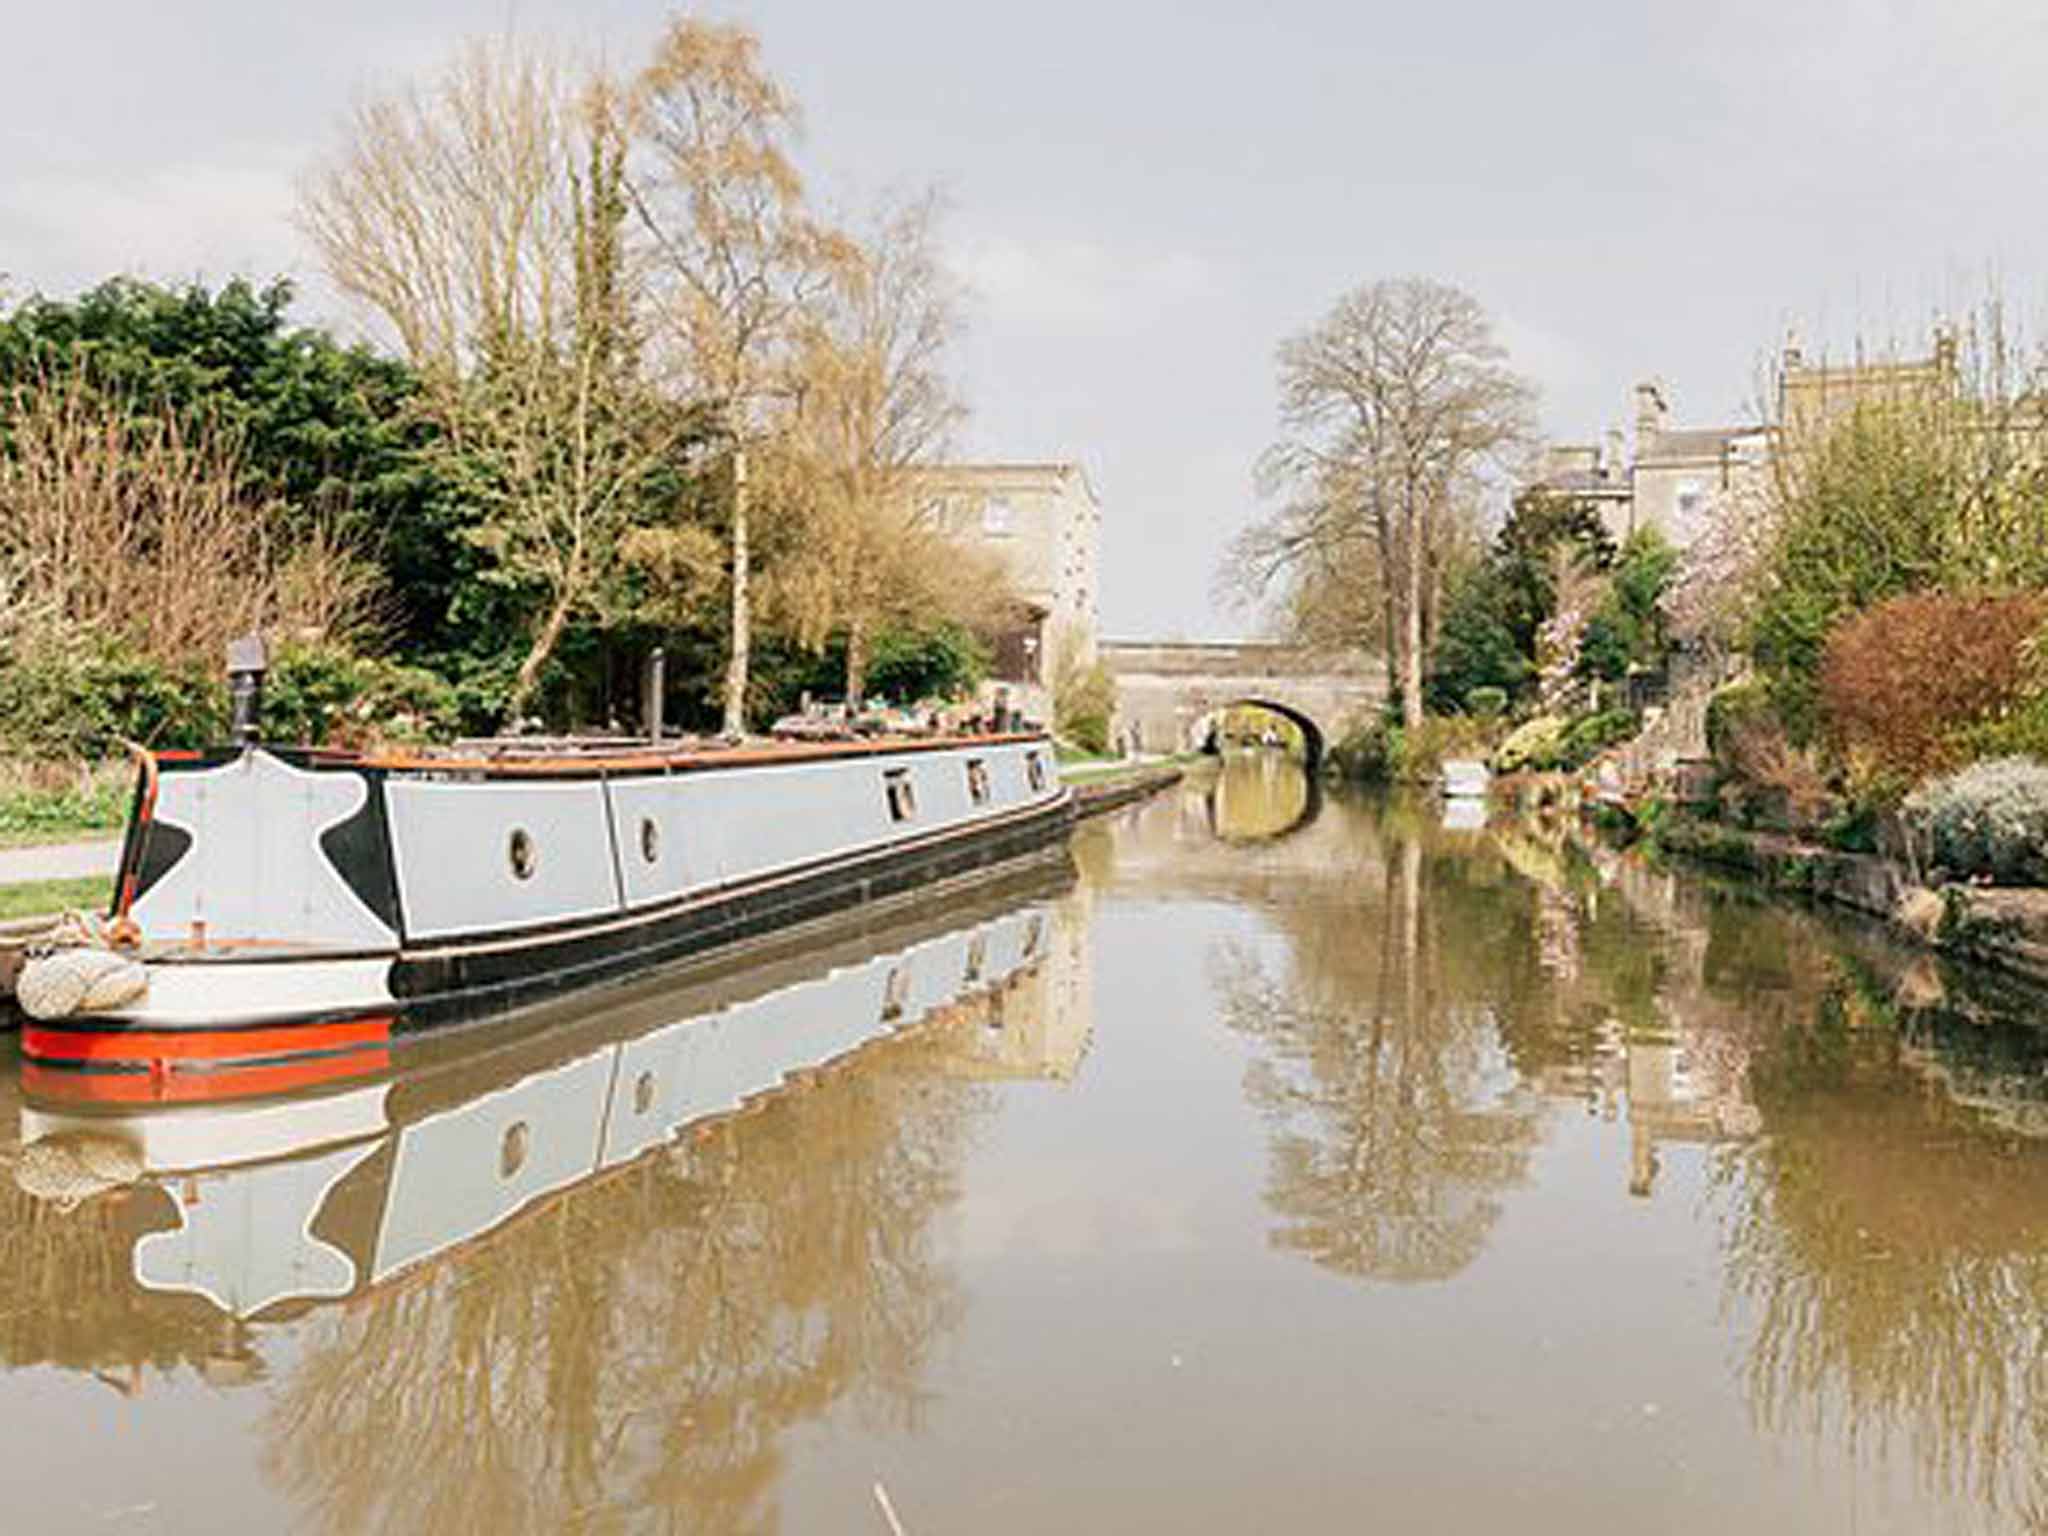 BBC4's All Aboard! The Canal Trip: unhurried, unobtrusive pace